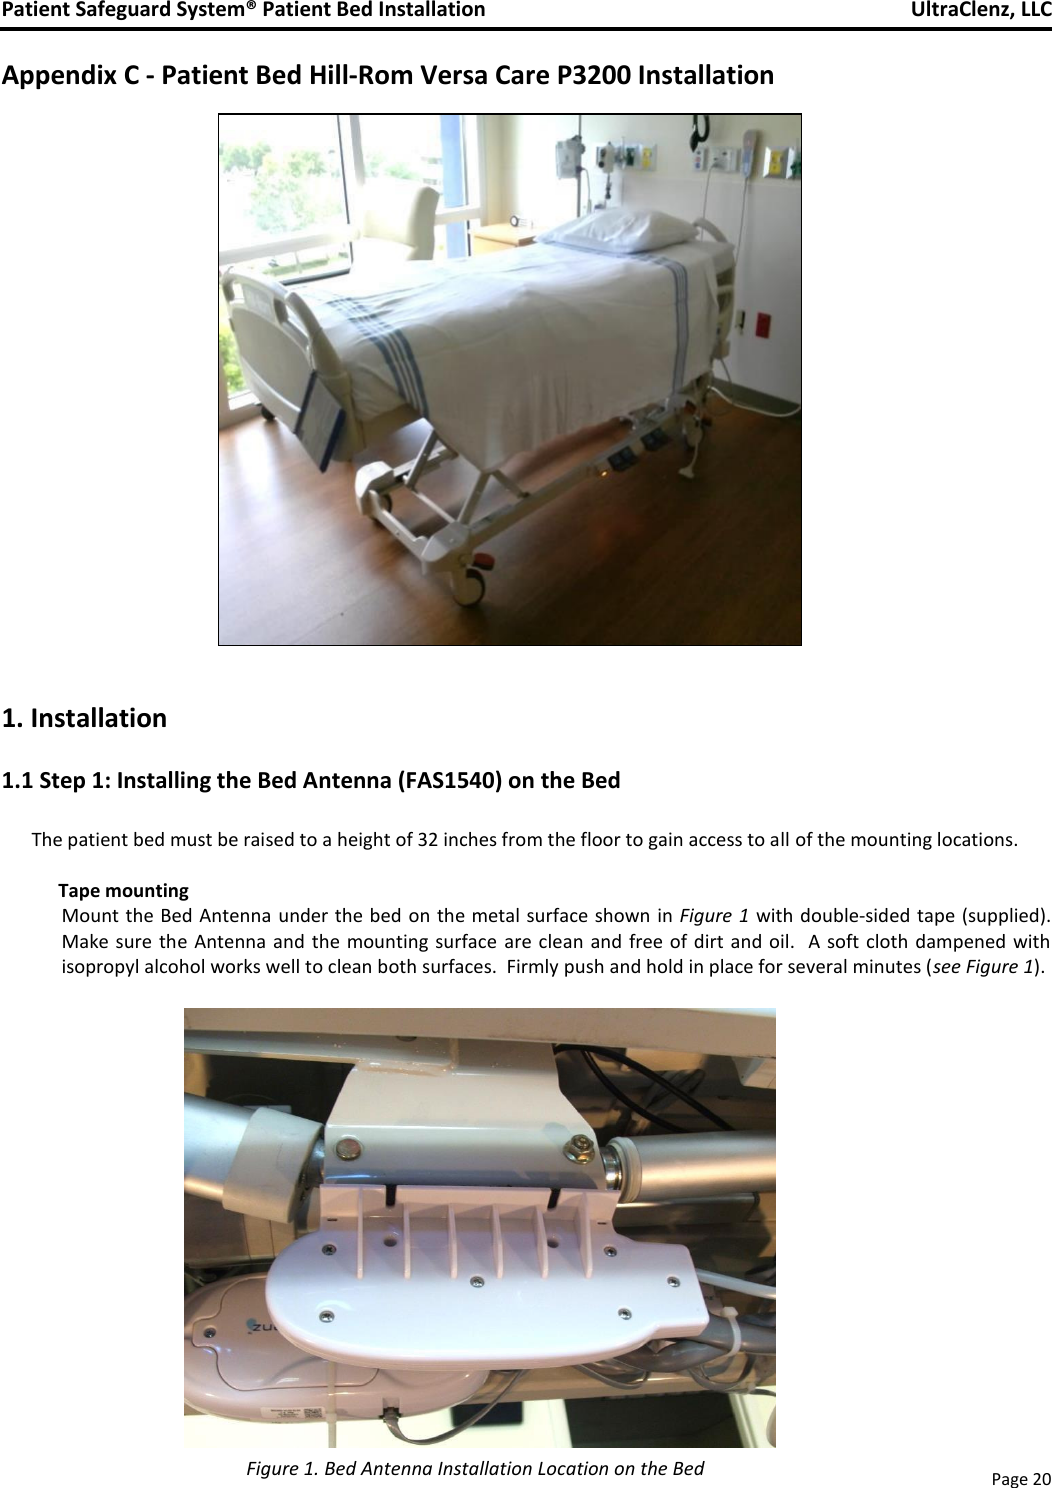 Patient Safeguard System® Patient Bed Installation   UltraClenz, LLC       Page 20  Appendix C - Patient Bed Hill-Rom Versa Care P3200 Installation                        1. Installation 1.1 Step 1: Installing the Bed Antenna (FAS1540) on the Bed  The patient bed must be raised to a height of 32 inches from the floor to gain access to all of the mounting locations.                Tape mounting Mount the Bed Antenna  under the bed on the metal surface shown  in Figure 1  with double-sided tape (supplied).  Make sure  the Antenna and the mounting surface  are clean  and  free of dirt  and oil.    A soft cloth dampened with isopropyl alcohol works well to clean both surfaces.  Firmly push and hold in place for several minutes (see Figure 1).                Figure 1. Bed Antenna Installation Location on the Bed 